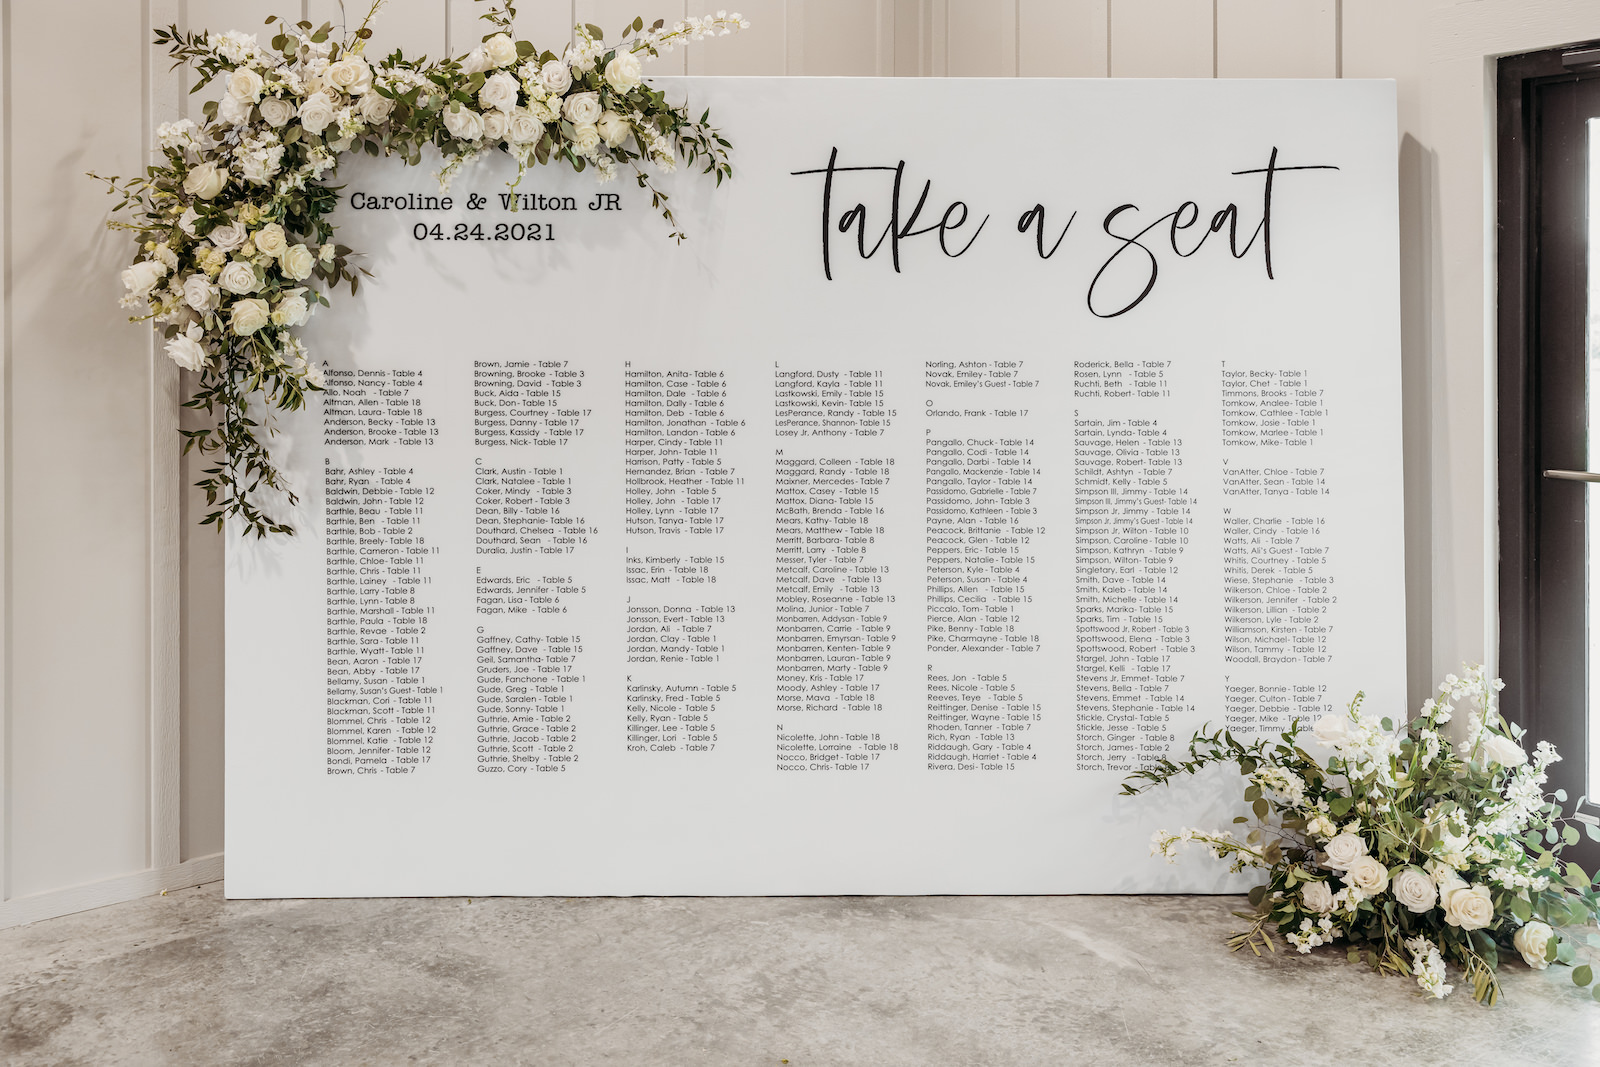 Classic Modern Black and White Extra Large Oversized Black and White Seating Chart Panel with Lush White Roses and Greenery Floral Arrangements